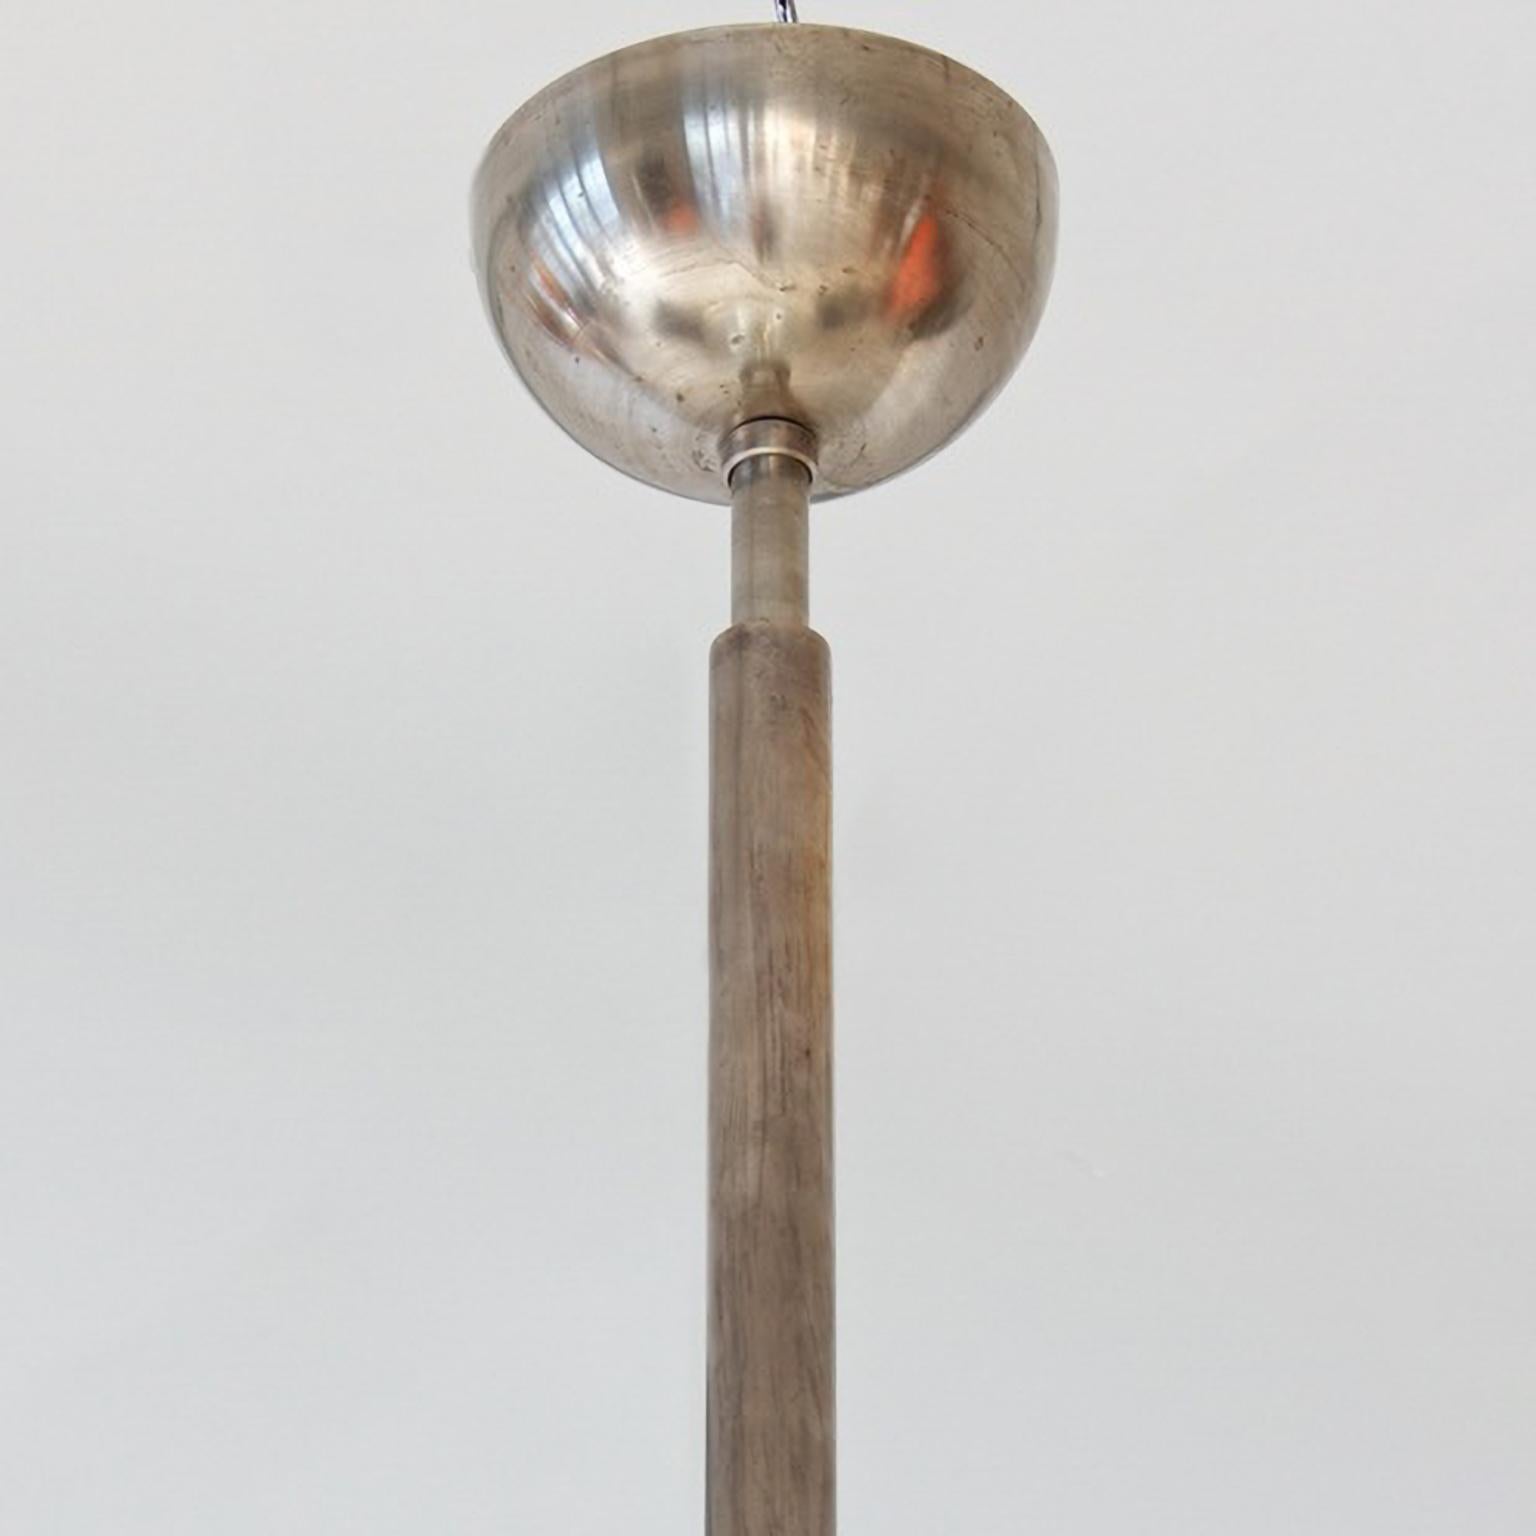 Modernist Pendant Light with 4 Opaline Glass Bulbs, Nickel Plated Brass c. 1930 For Sale 4